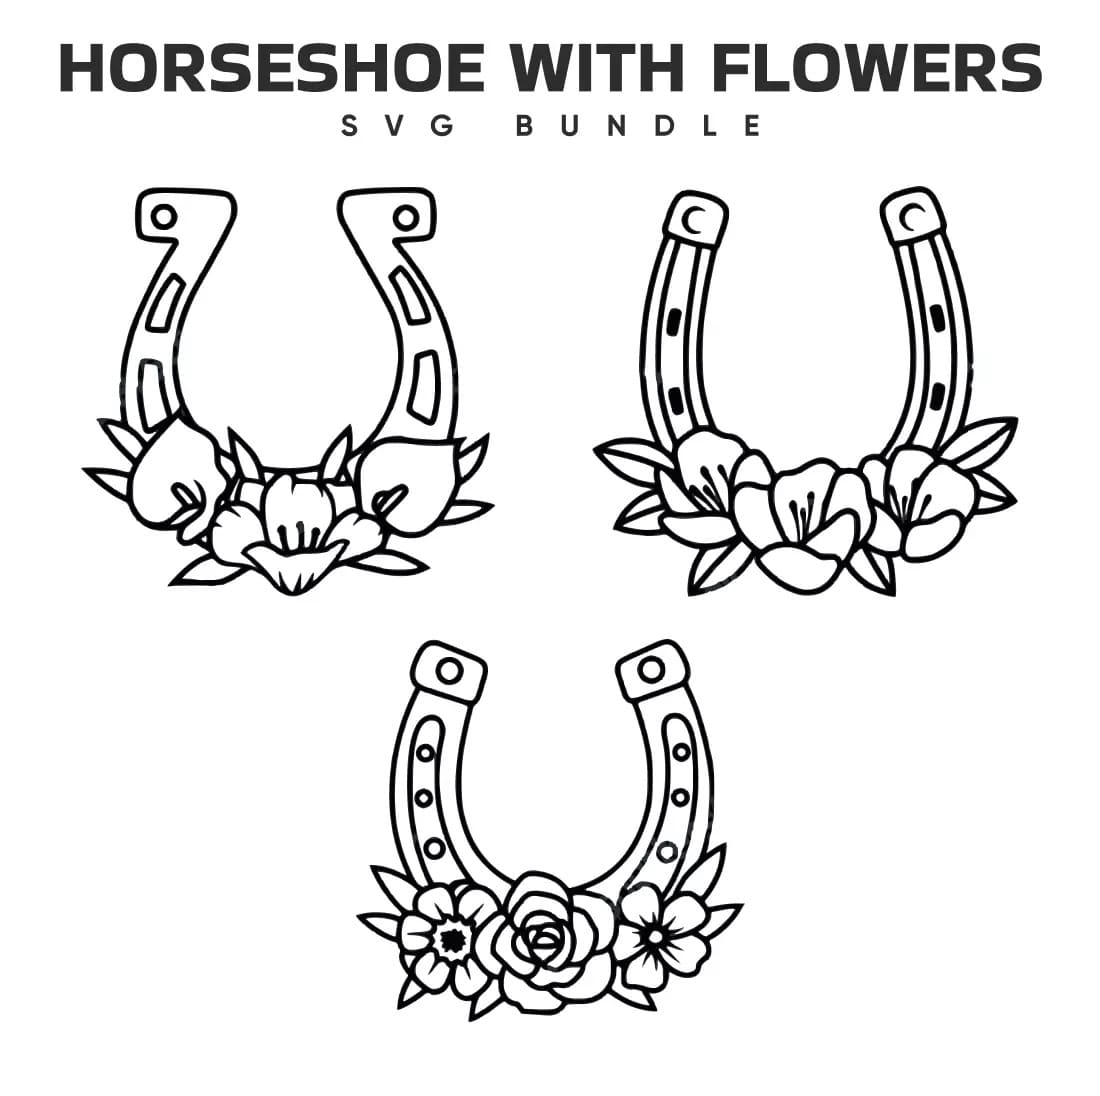 Set of three horseshoes with flowers on them.